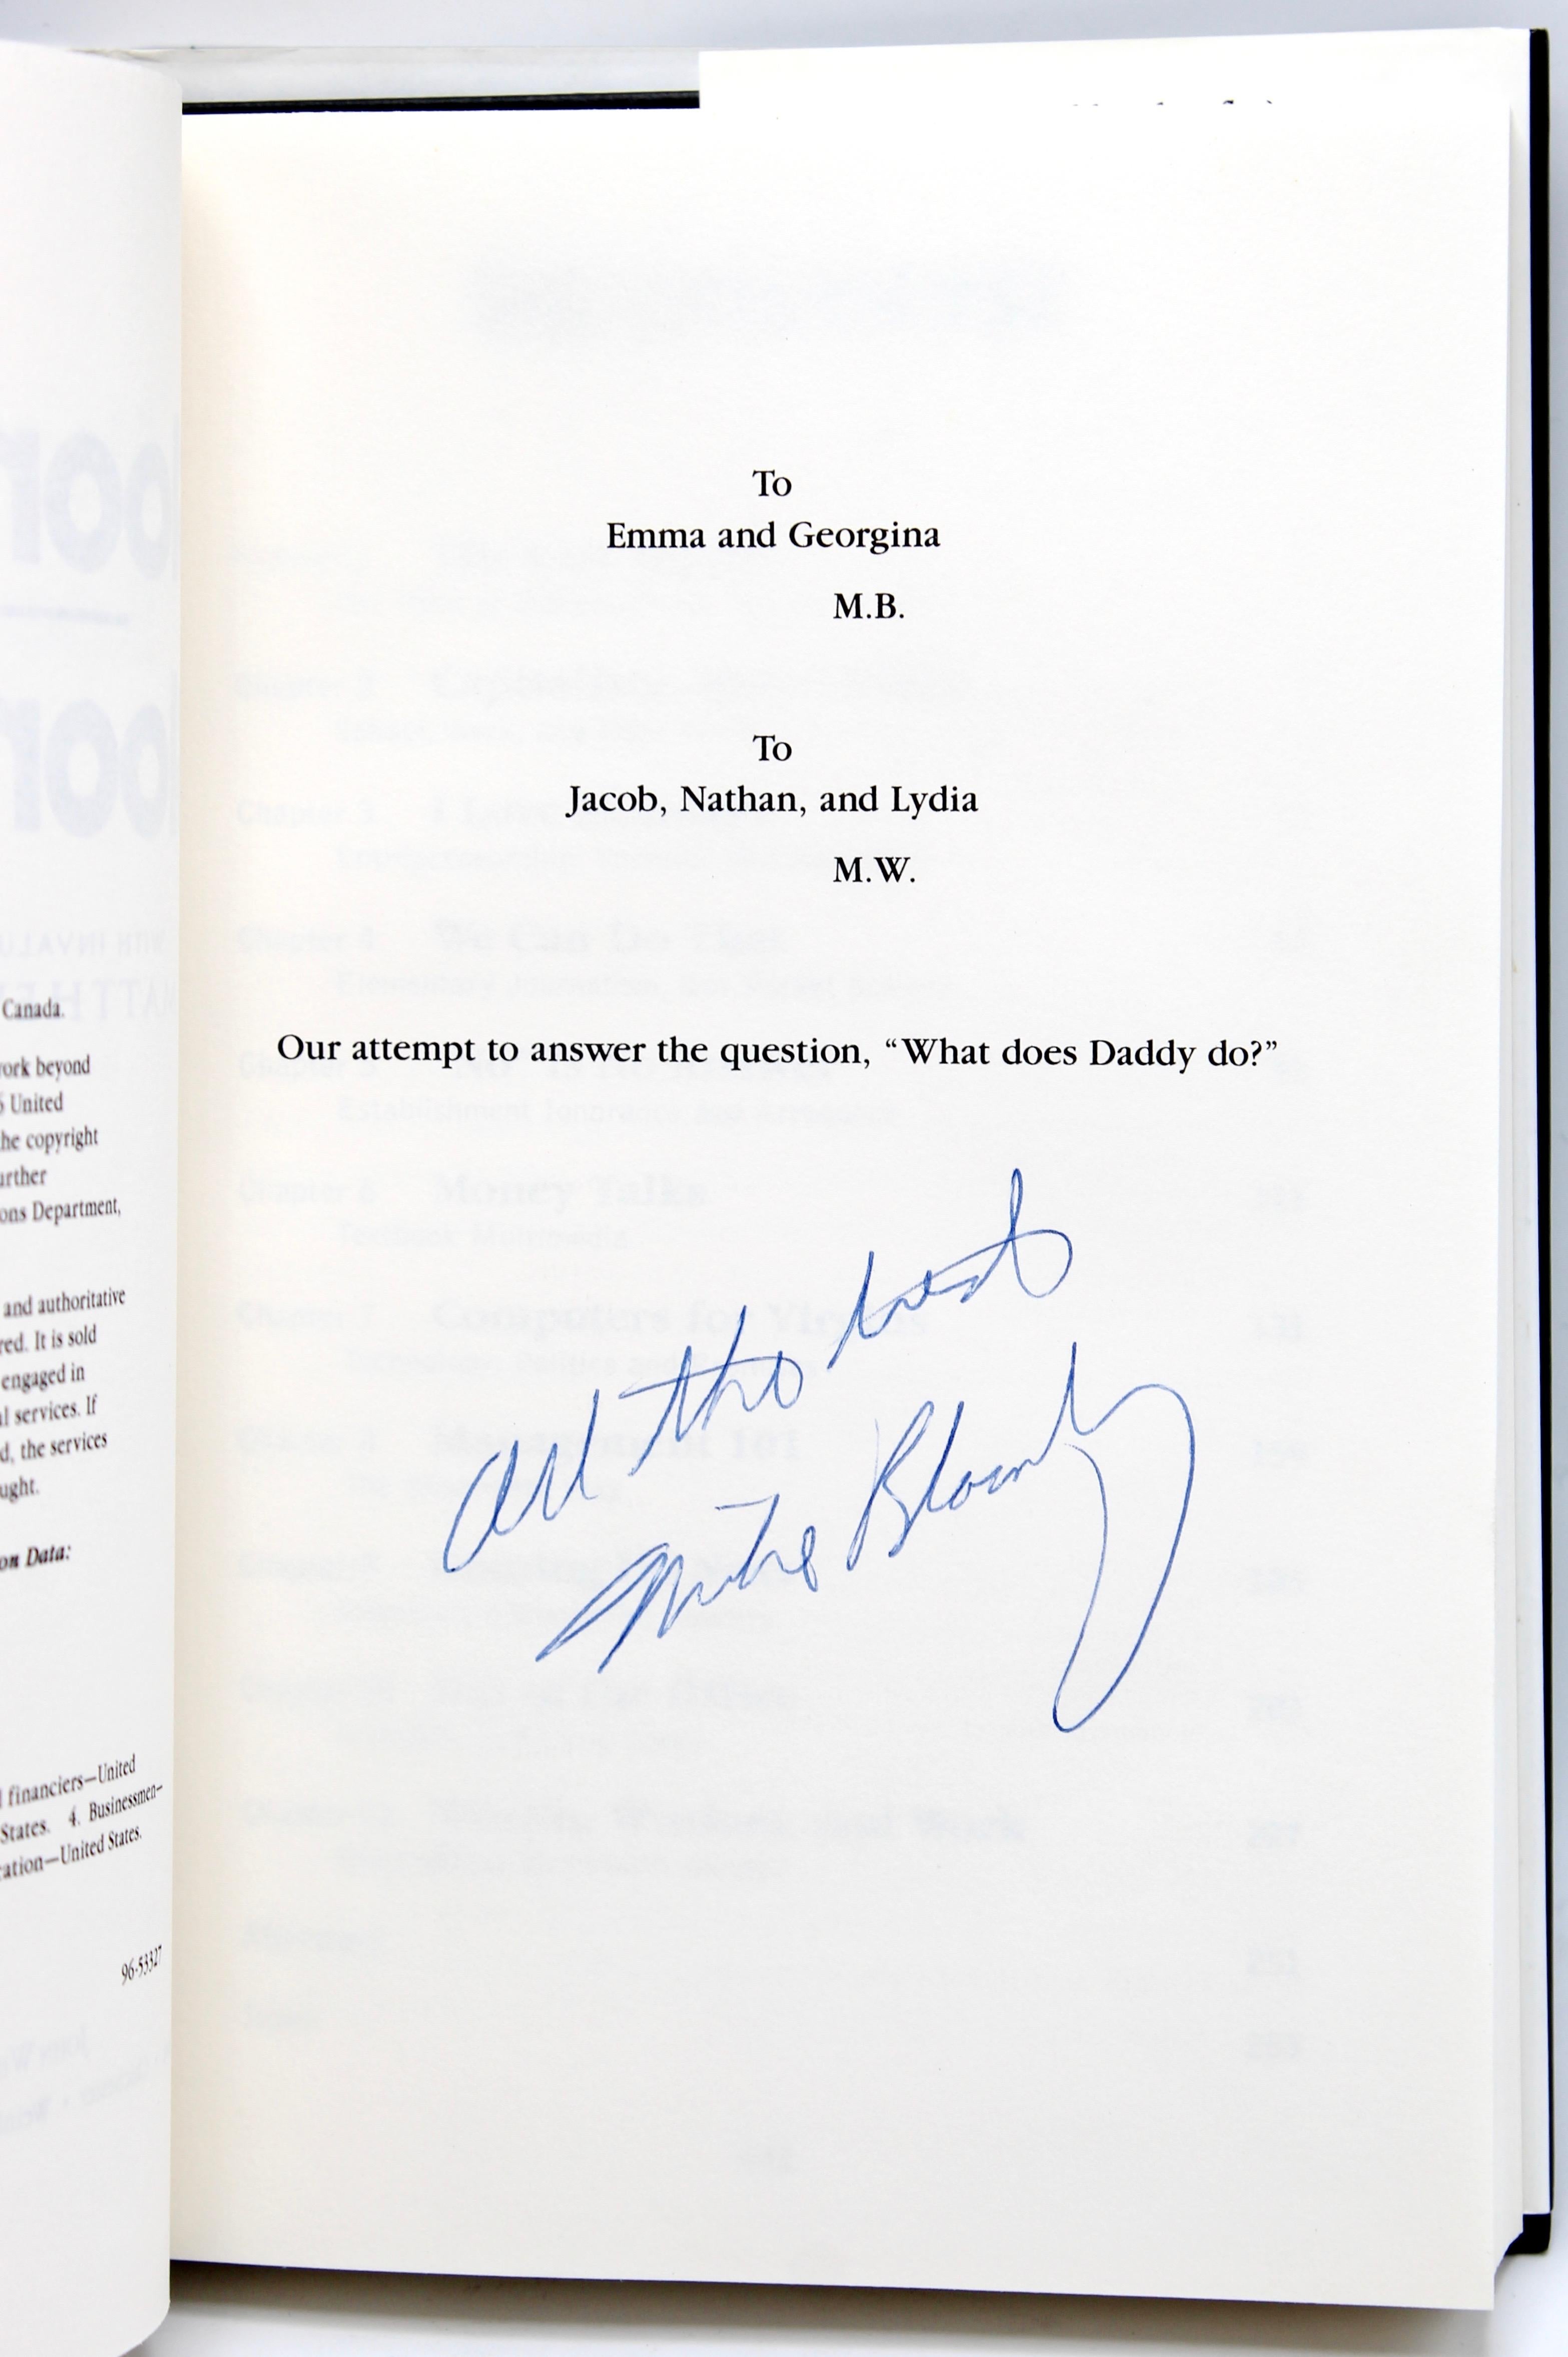 This first edition of Bloomberg by Bloomberg was published by John Wiley & Sons in New York in 1997. Signed and inscribed by Bloomberg on the dedication page, this book is complete with the original dust jacket. 

Michael Bloomberg remains one of